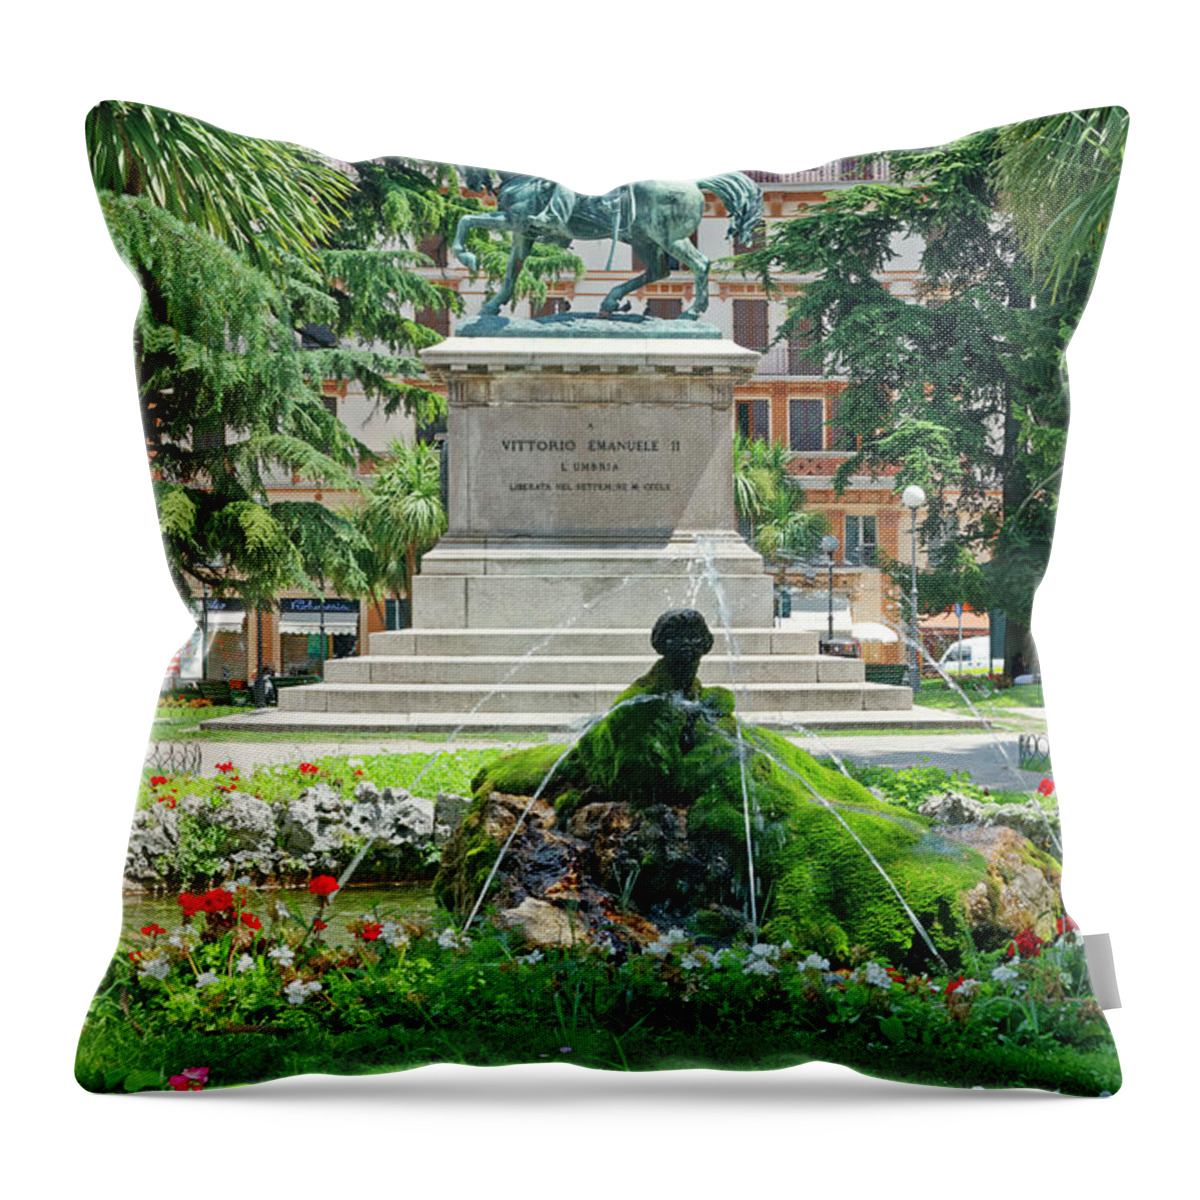 Bronze Equestrian Statue Throw Pillow featuring the photograph Vittorio Emanuele II Statue by Sally Weigand